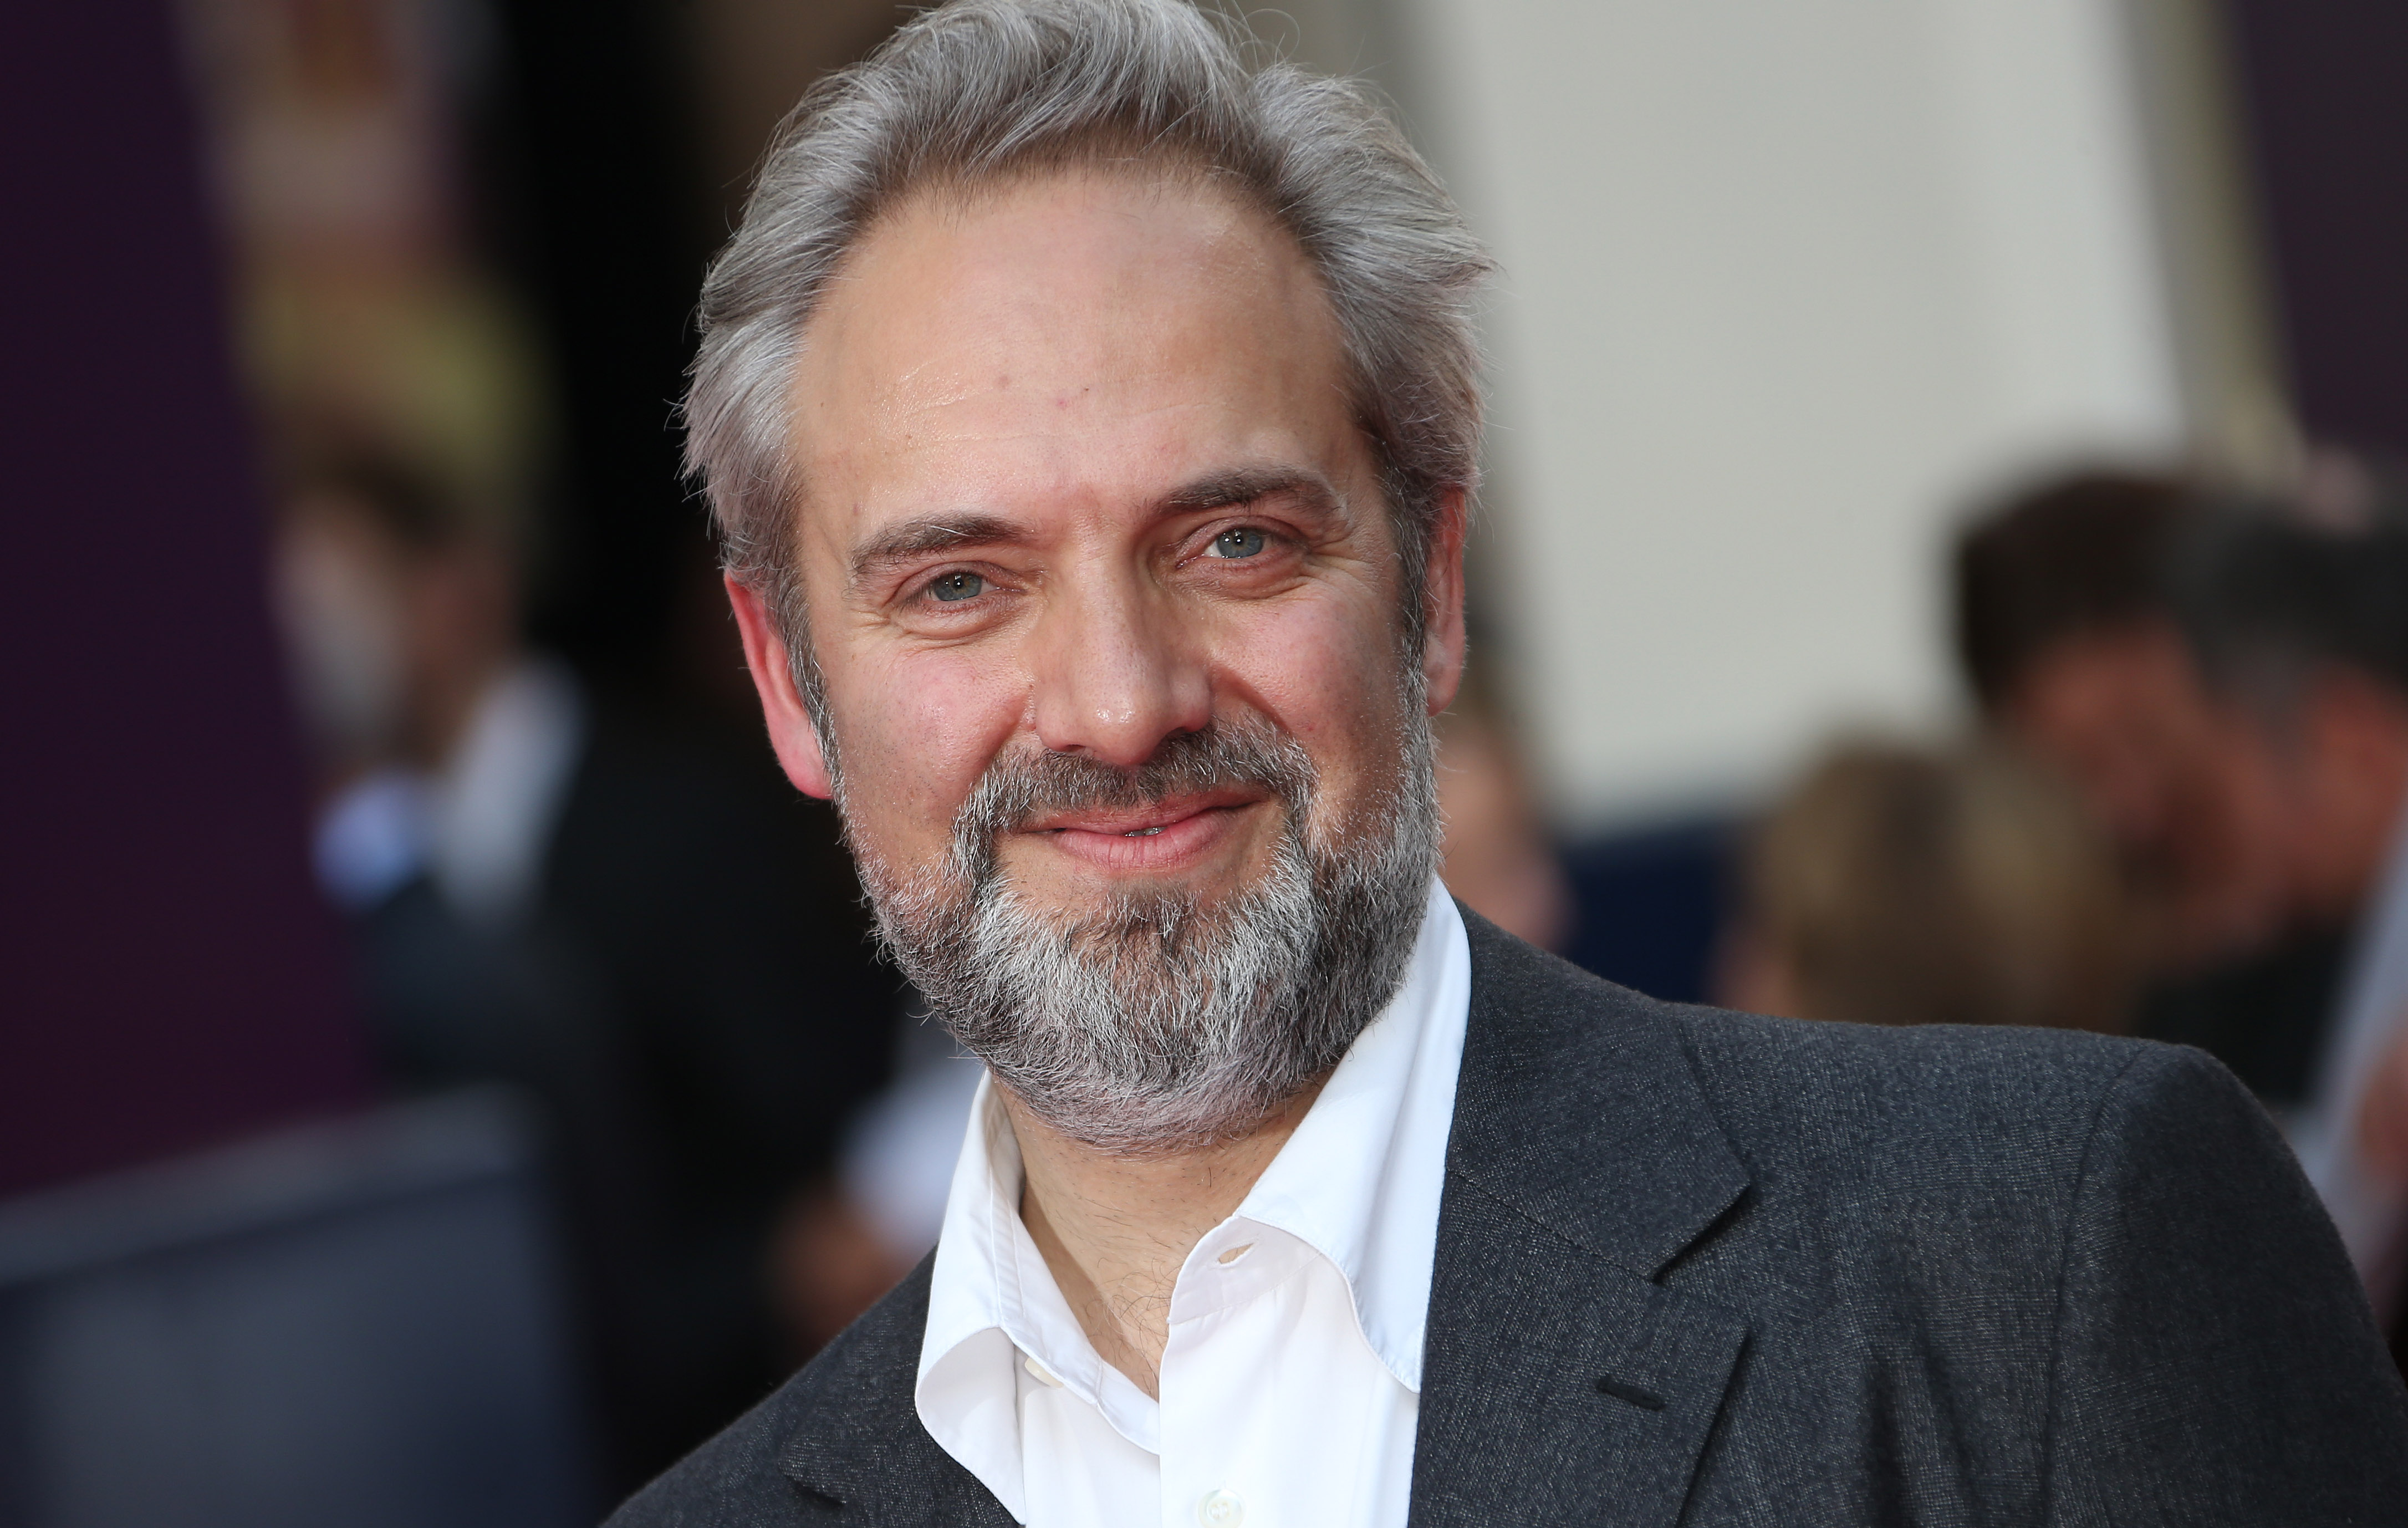 FILE - In this June 25, 2013 file photo, director Sam Mendes arrives for the opening night of the musical "Charlie and the Chocolate Factory," at the Drury Lane Theatre in central London. Mendes is coming back to direct another James Bond film with Daniel Craig following the enormously successful Skyfall. Mendes had suggested Skyfall would be his lone entry in the 007 canon, but Bond producers and Sony Pictures announced his return Thursday, July 11. (Photo by Joel Ryan/Invision/AP, File)